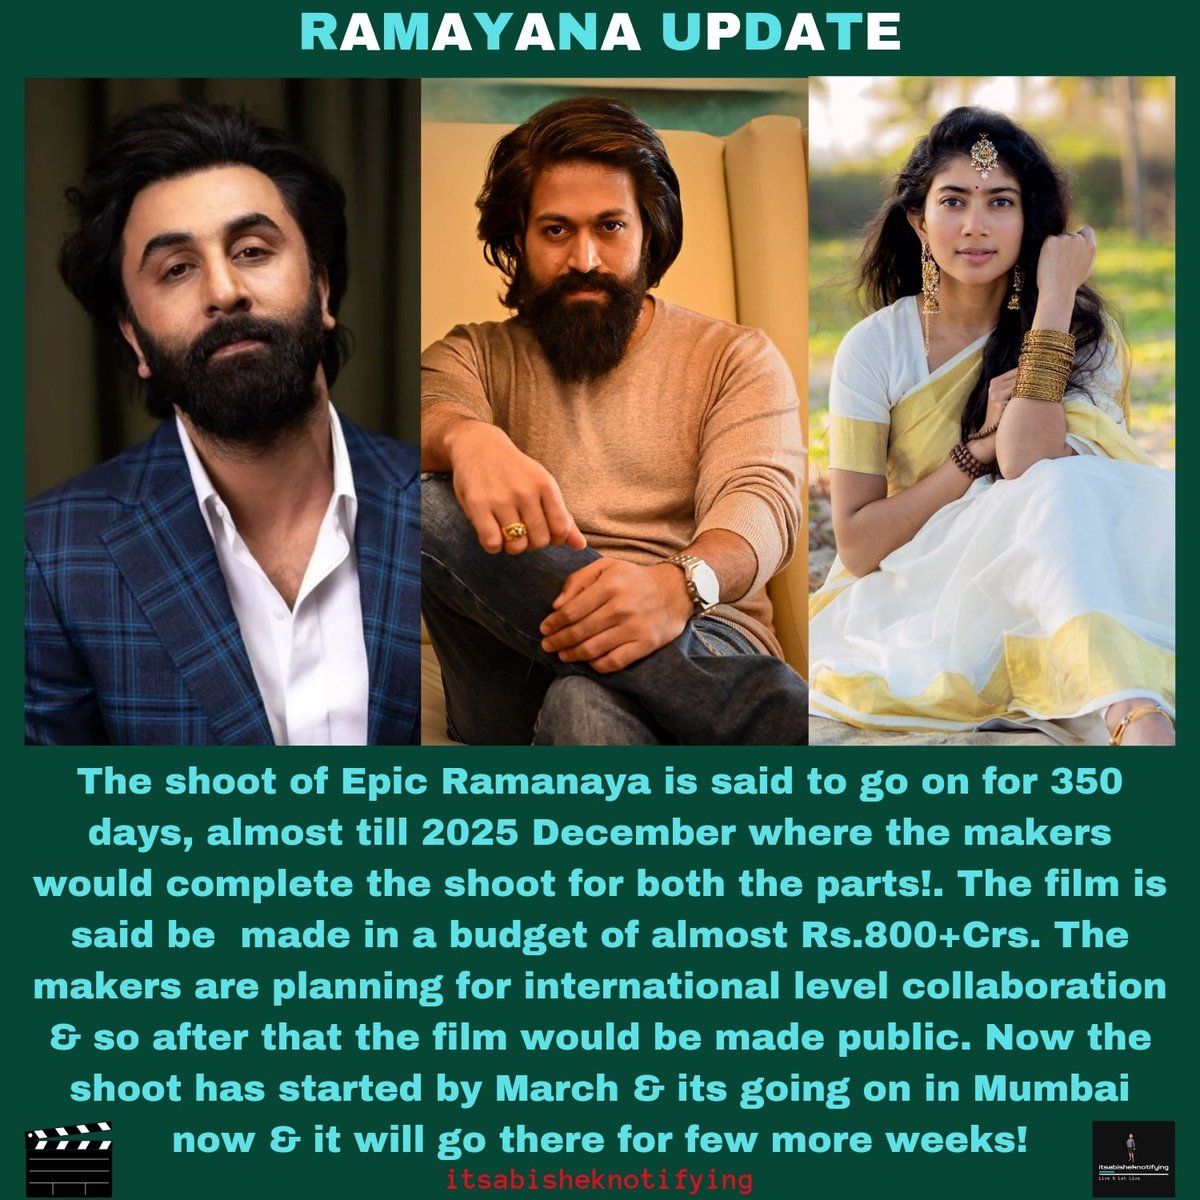 #Ramayana shooting to go till December 2025 with 350 days of shoot planned for completing both the parts with the budget being around 800Crs+ for a part. But currently stalled due to a copyright infringement case by #MadhuMantena

#RanbirKapoor #SaiPallavi #Yash #Bollywood